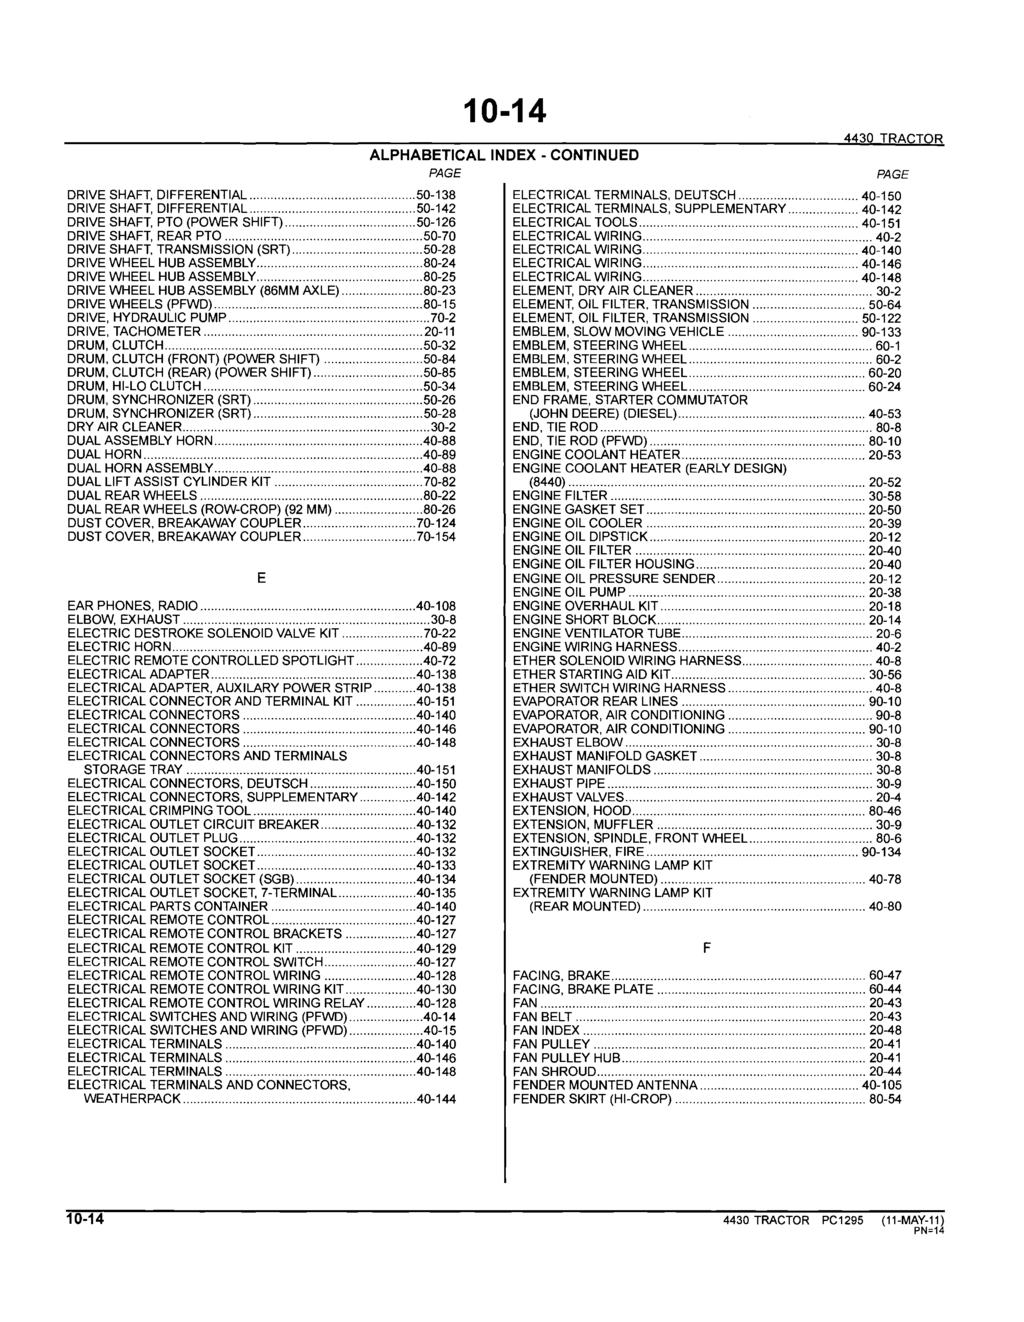 10-14 ALPHABETICAL INDEX - CONTINUED PAGE 4430 TRACTOR DRIVE SHAFT, DIFFERENTIAL... 50-138 ELECTRICAL TERMINALS, DEUTSCH... 40-150 DRIVE SHAFT, DIFFERENTIAL.